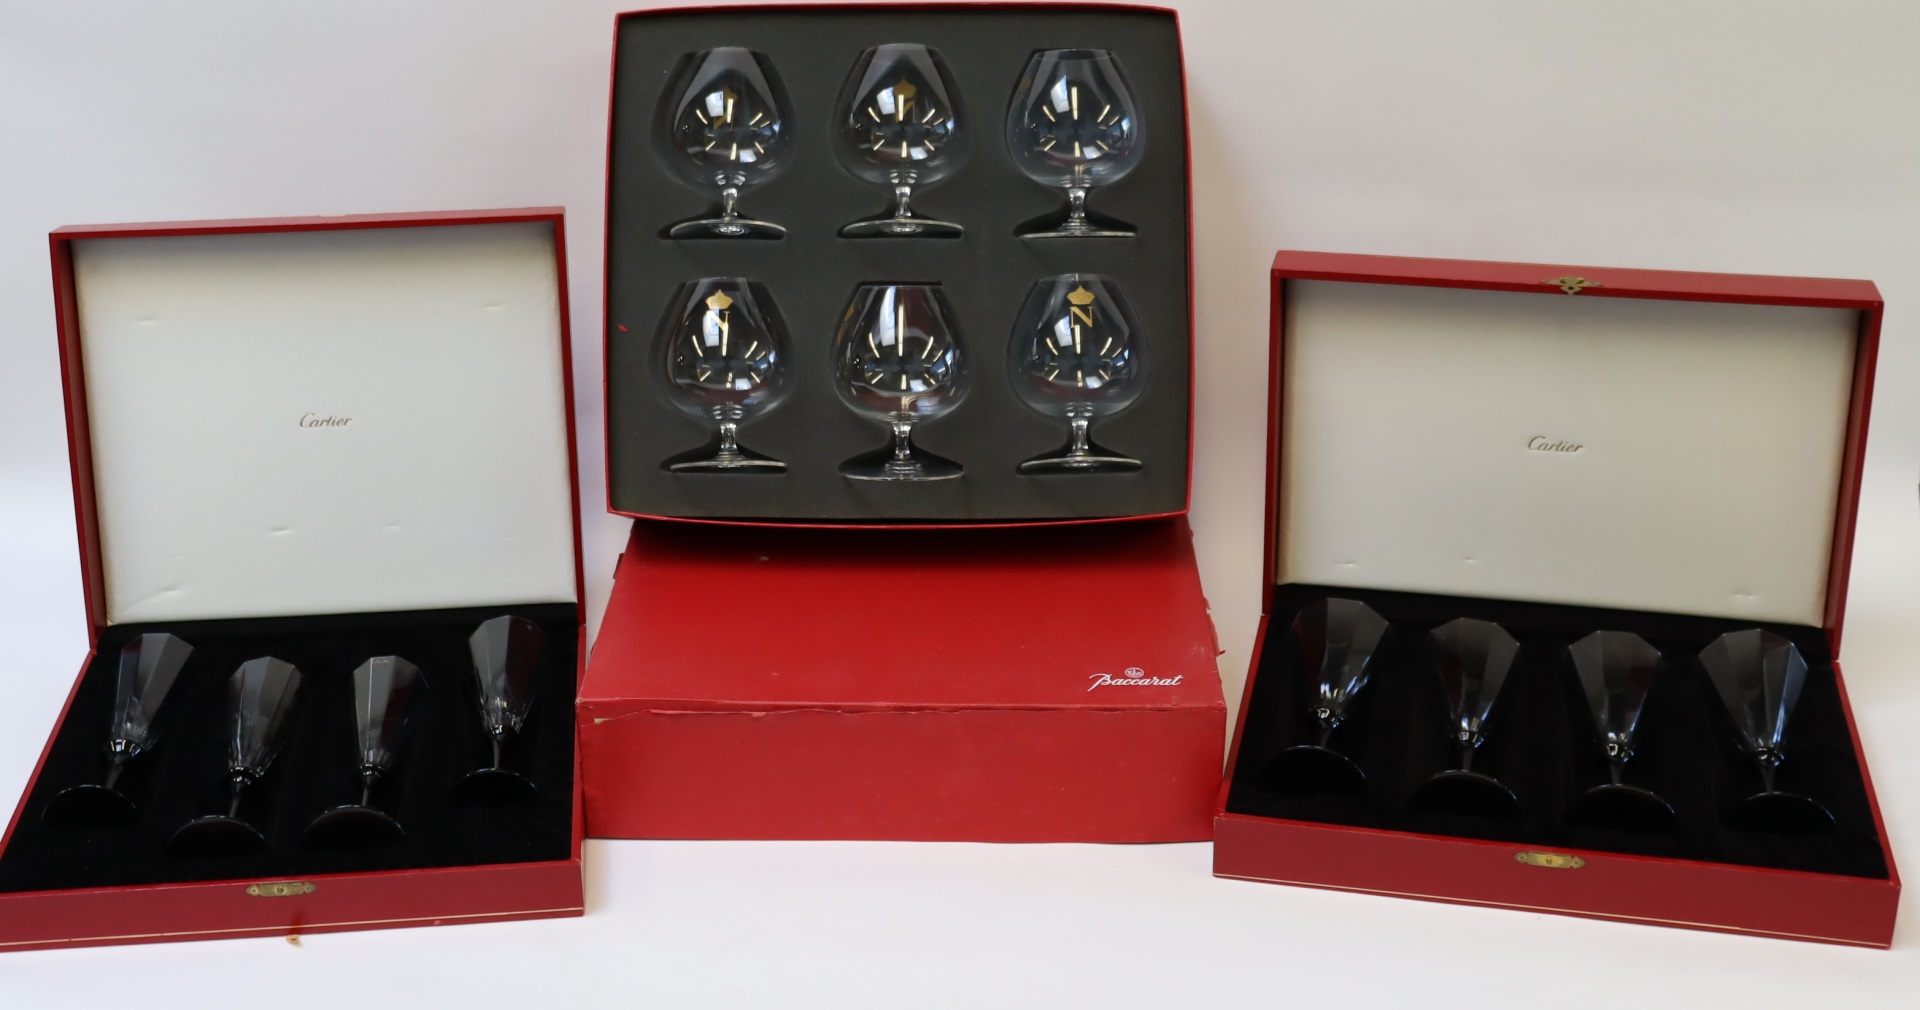 CARTIER BACCARAT BOXED GLASS 3bde30